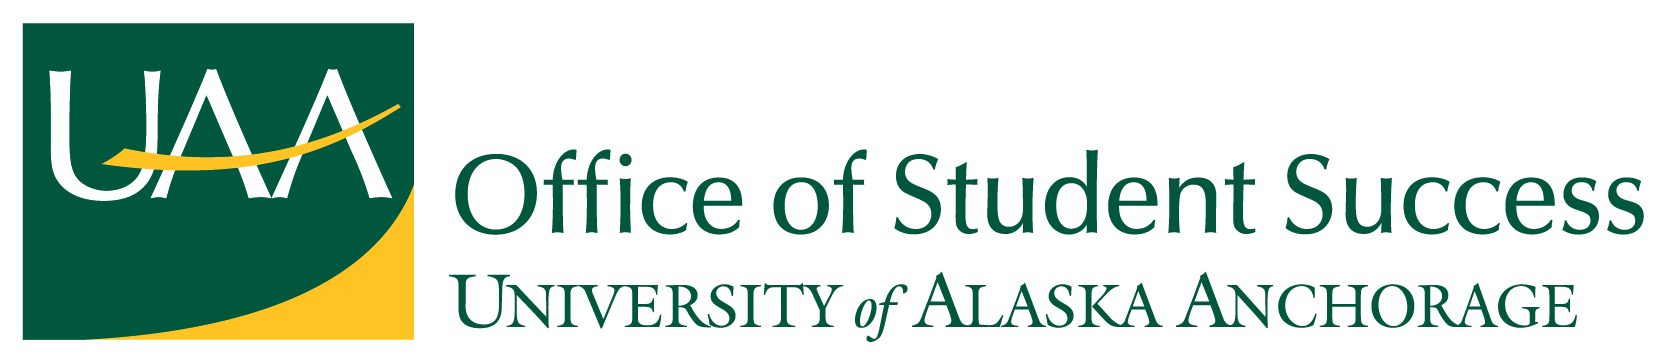 UAA Office of Student Success